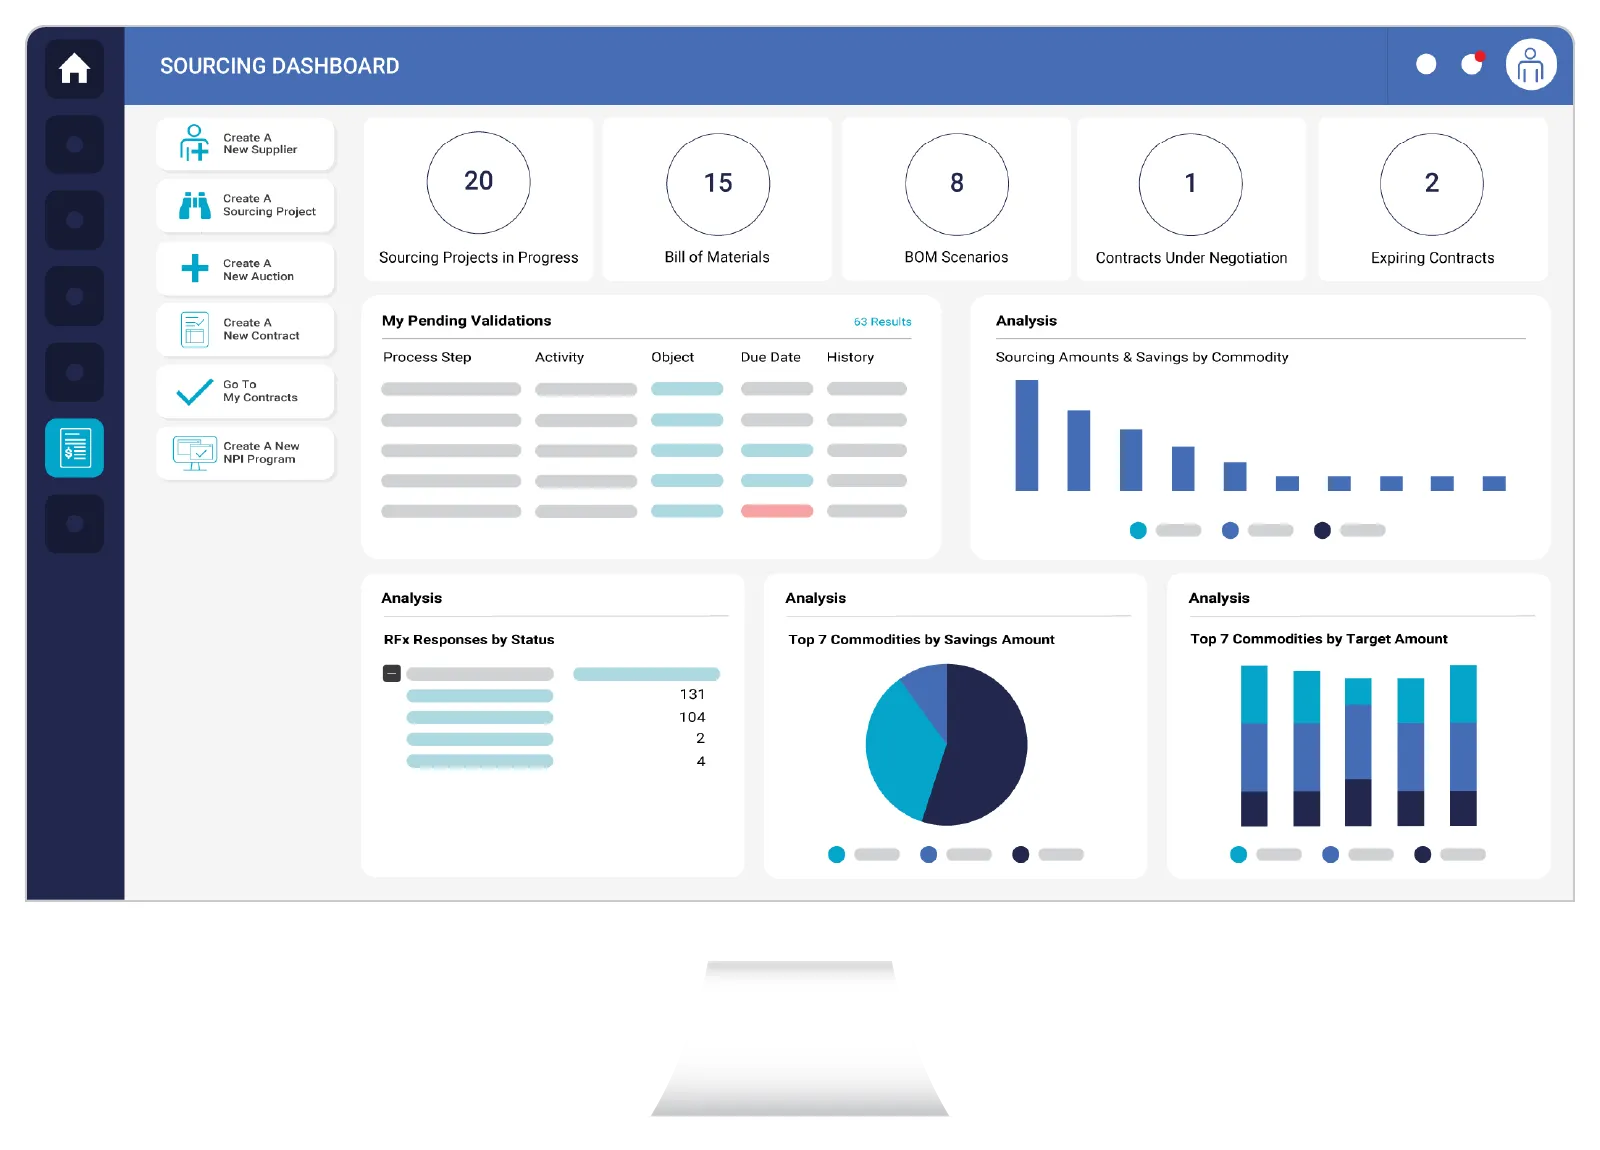 Sourcing: Automate Processes and Effectively Execute Strategies
- Source all spend: direct, indirect, services, capex
- Unparalleled project management and transparency
- Analytics for optimal supplier selections